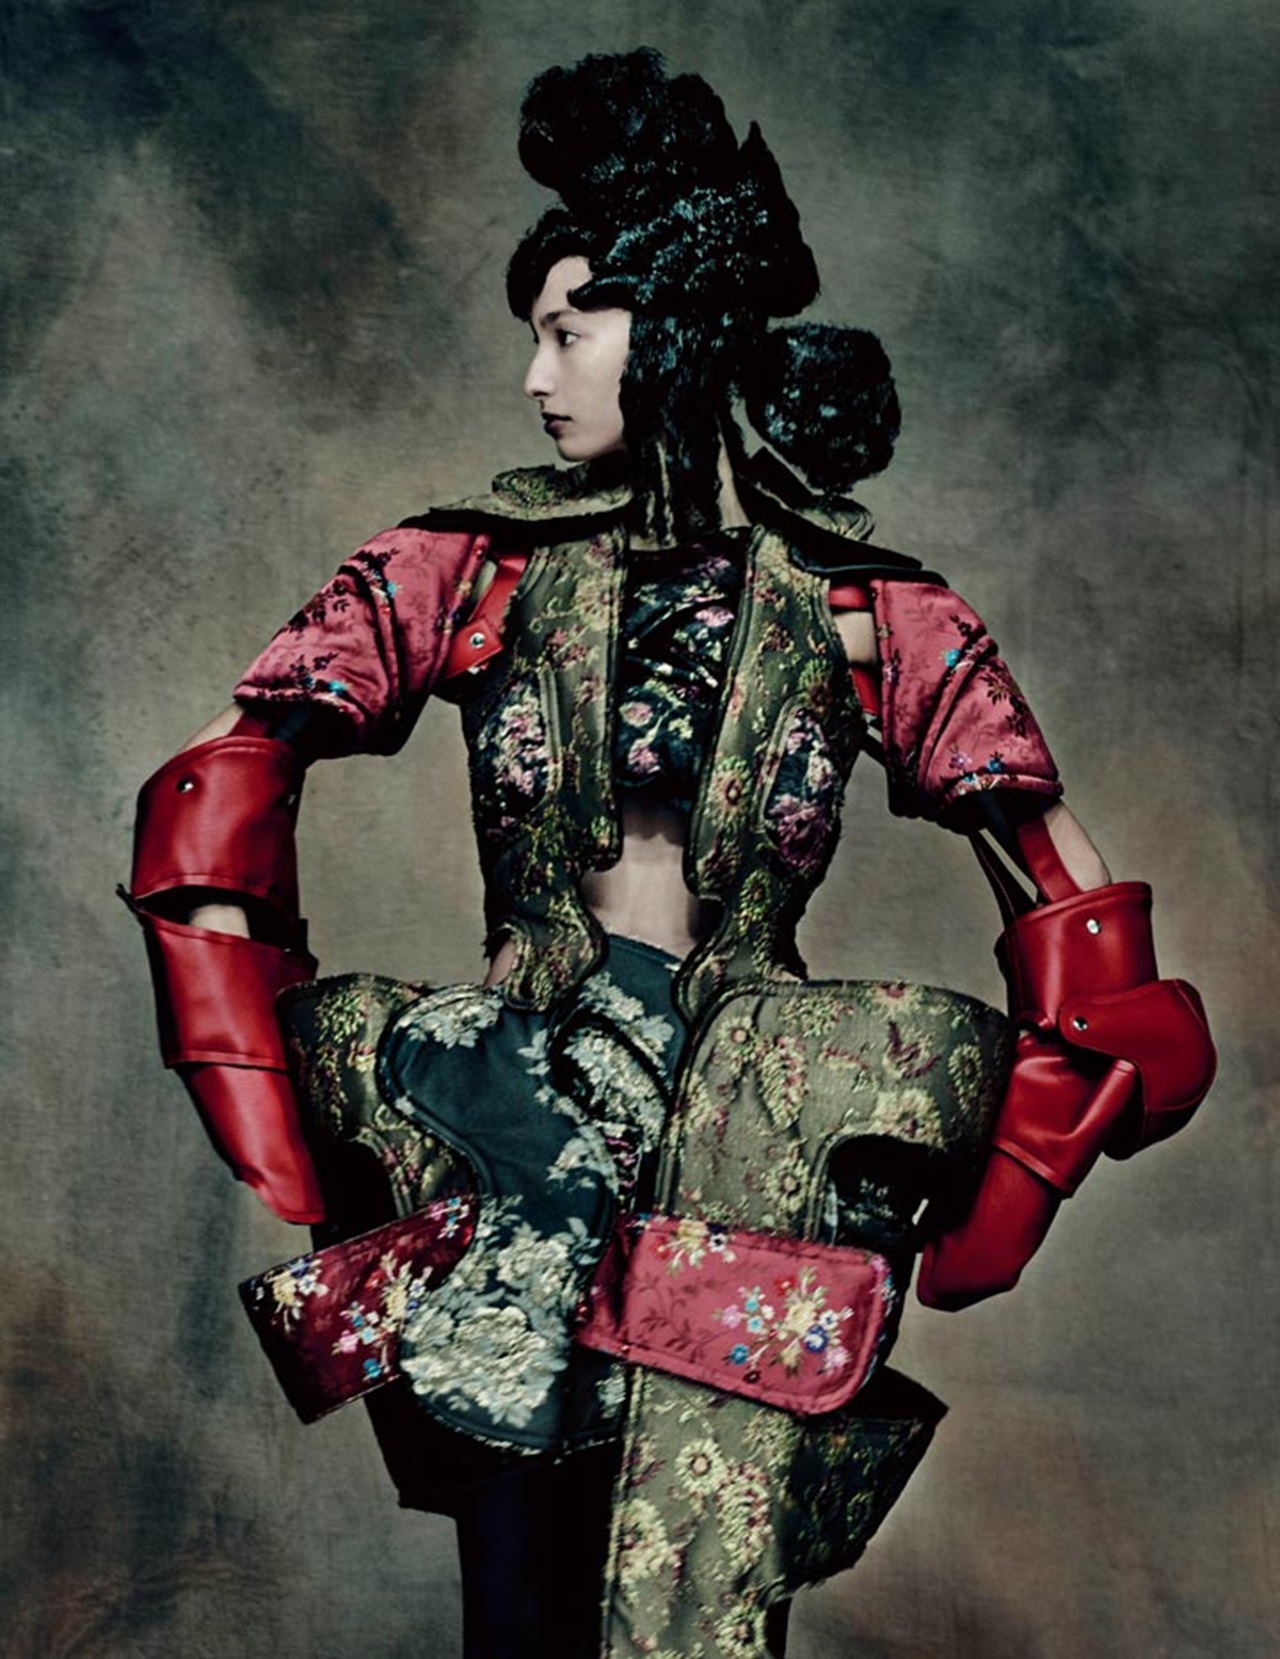 Rei Kawakubo (Japanese, born 1942) for Comme des Garçons (Japanese, founded 1969). 18th-Century Punk, autumn/winter 2016–17; Courtesy of Comme des Garçons. Photograph by © Paolo Roversi